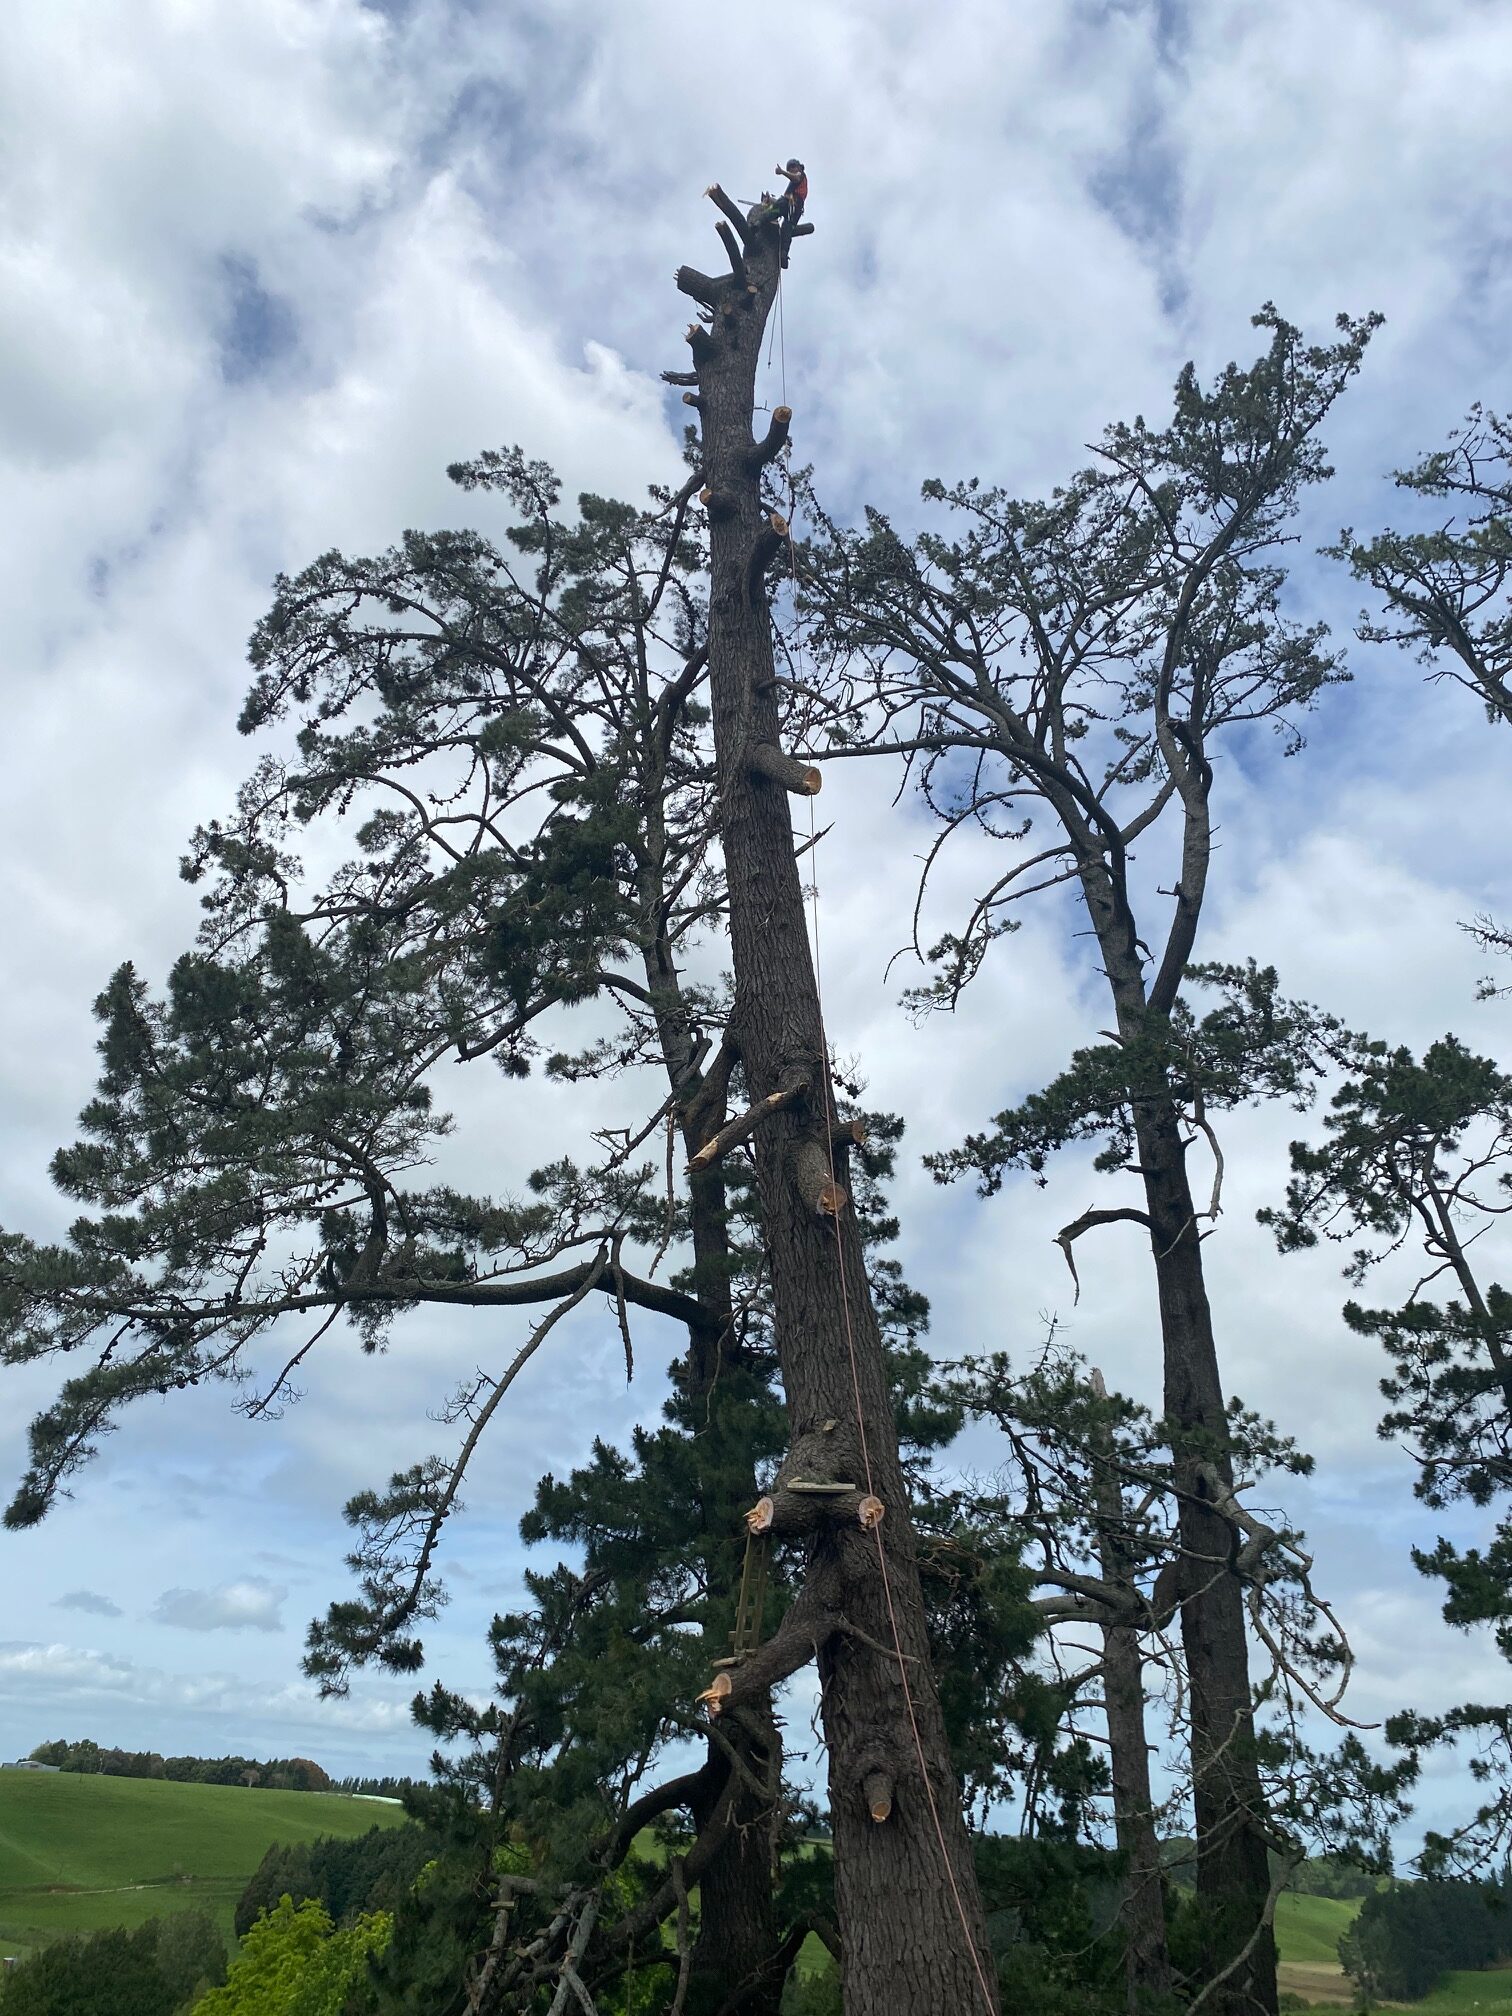 Removal of oldman pine Leaning towards main road.